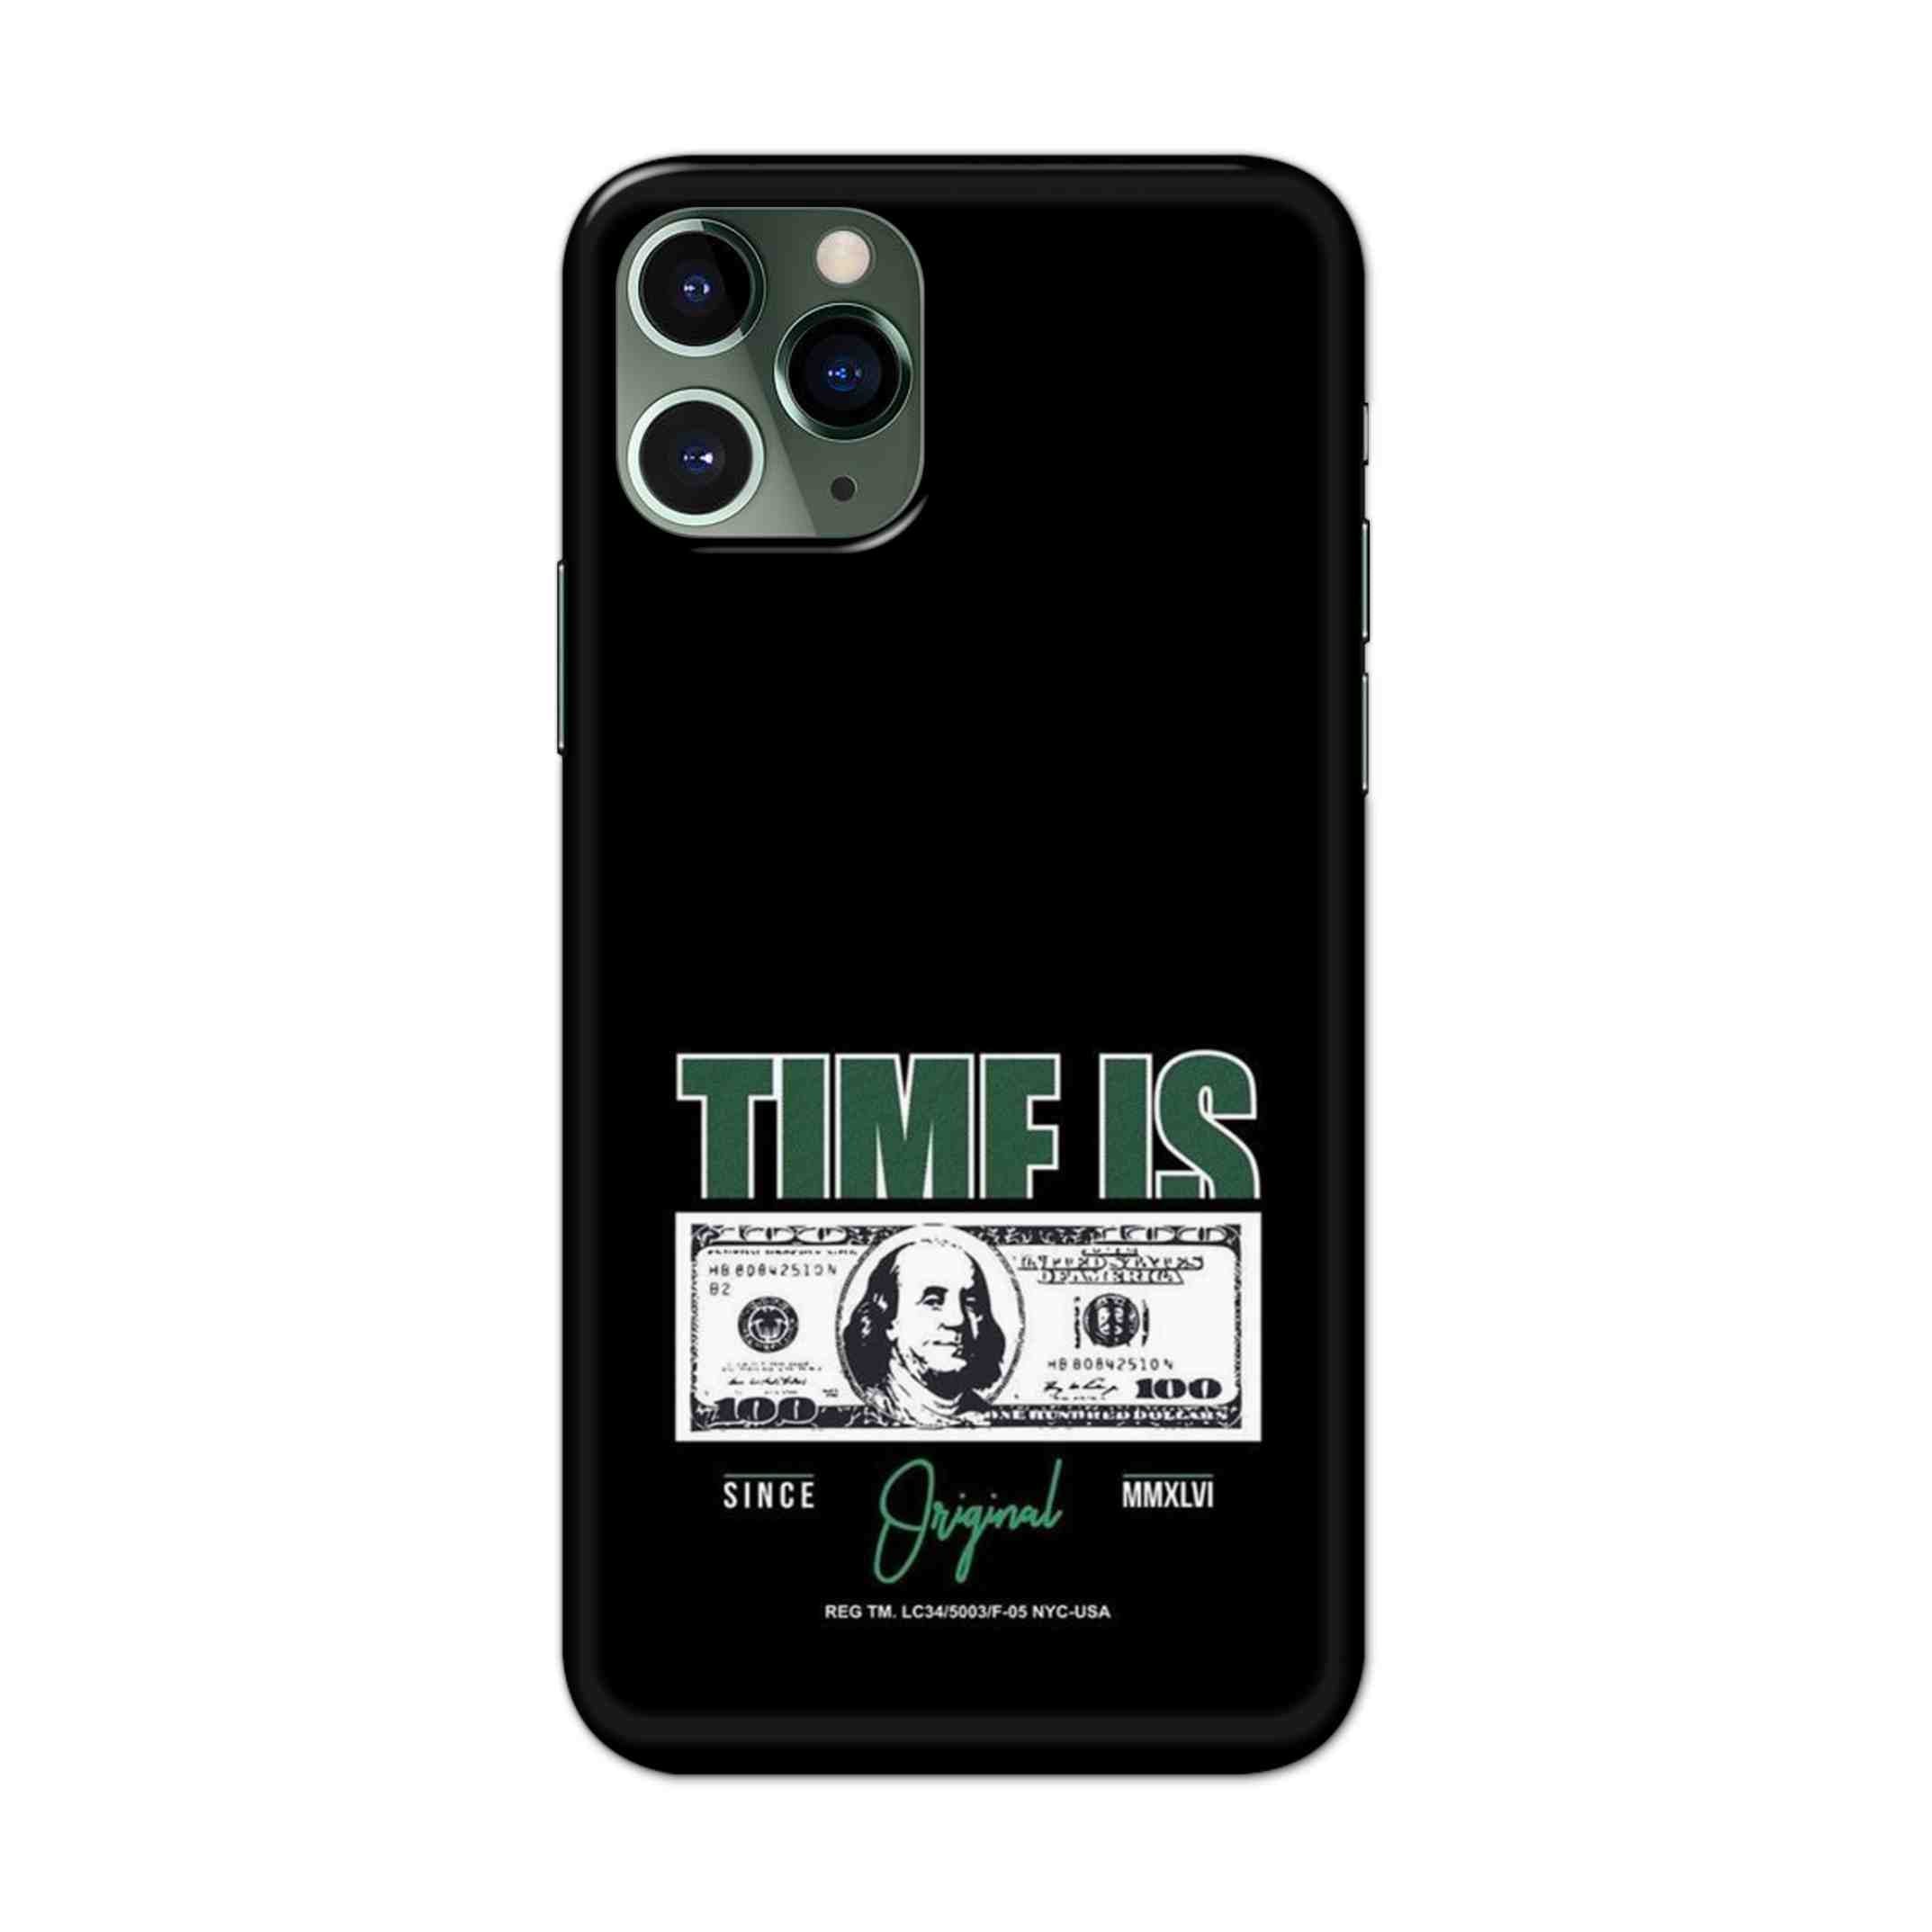 Buy Time Is Money Hard Back Mobile Phone Case/Cover For iPhone 11 Pro Max Online